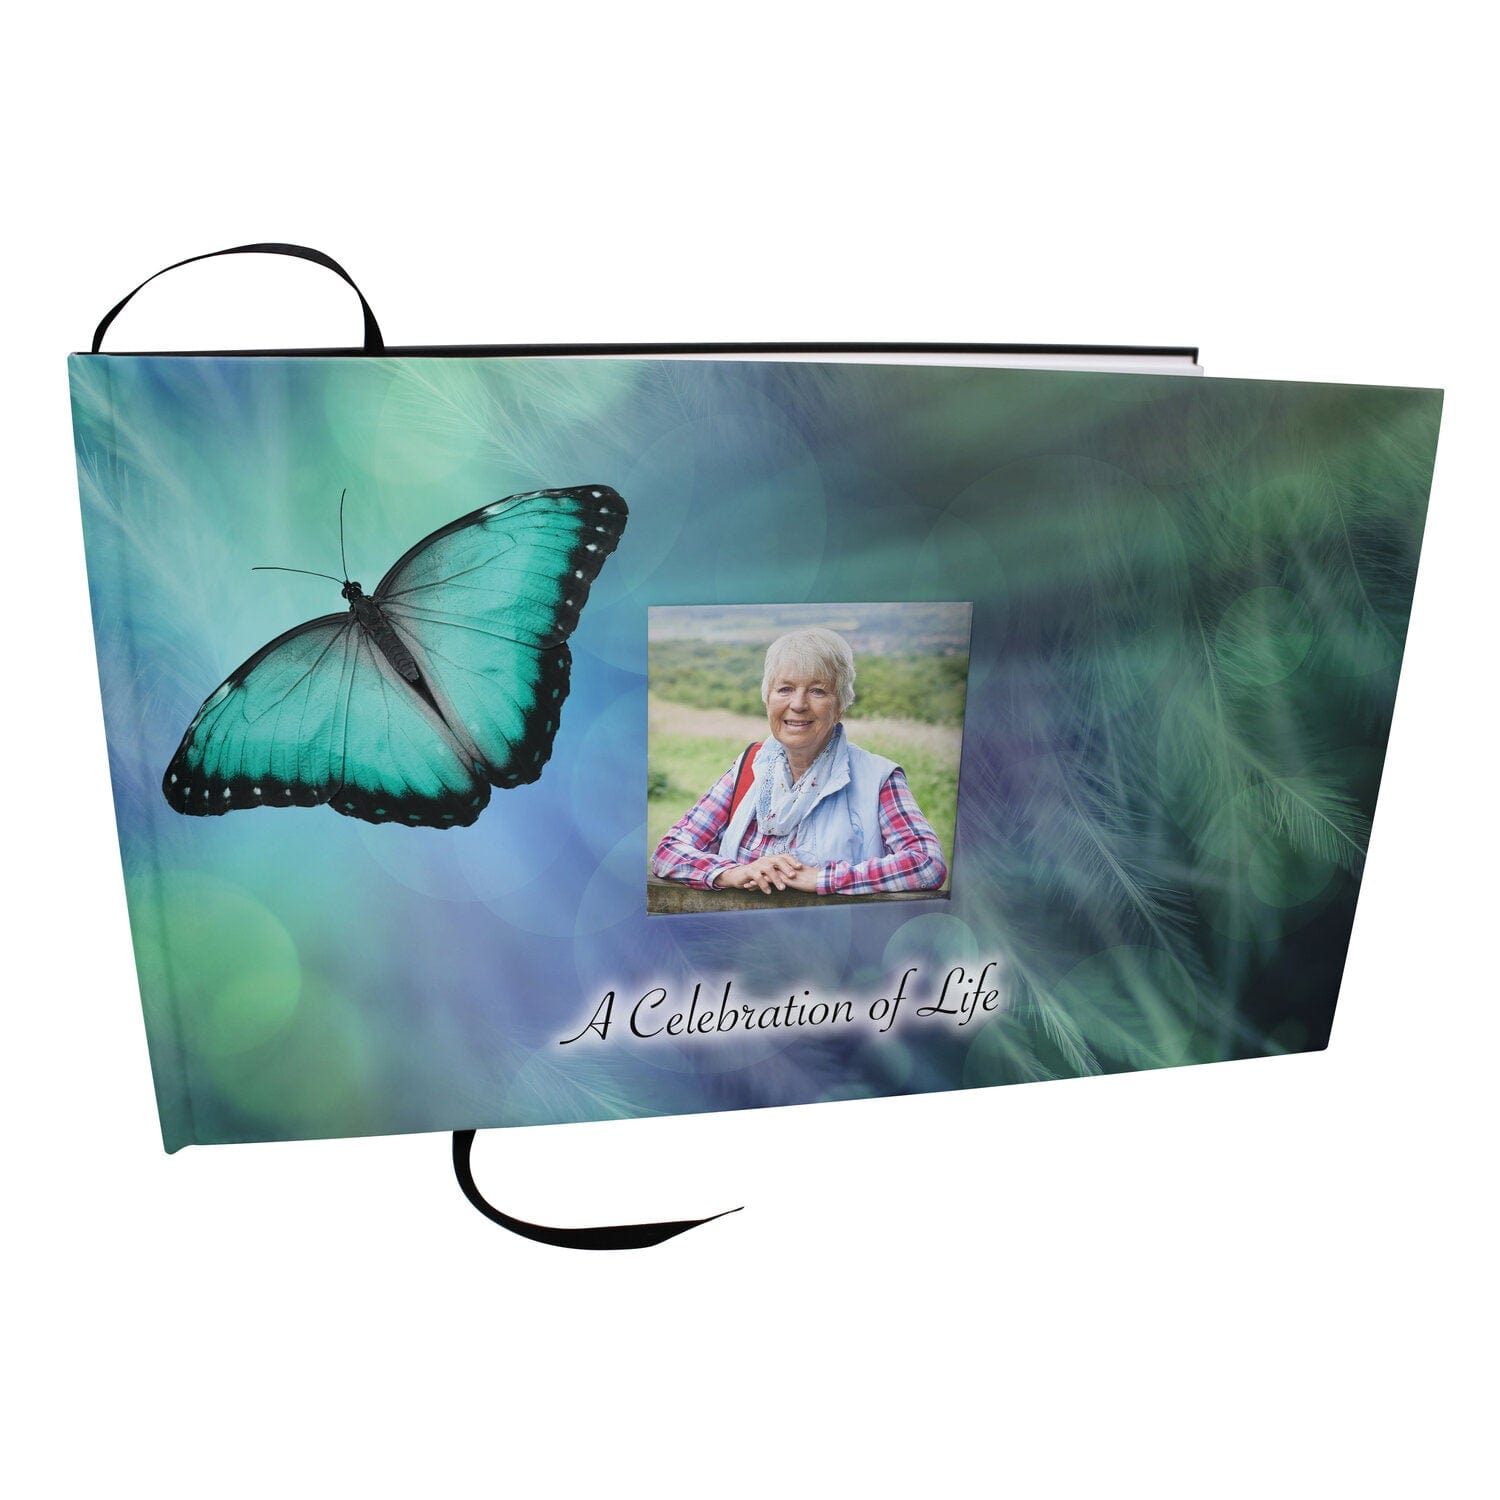 Commemorative Cremation Urns Bokeh Butterfly Matching Themed 'Celebration of Life' Guest Book for Funeral or Memorial Service